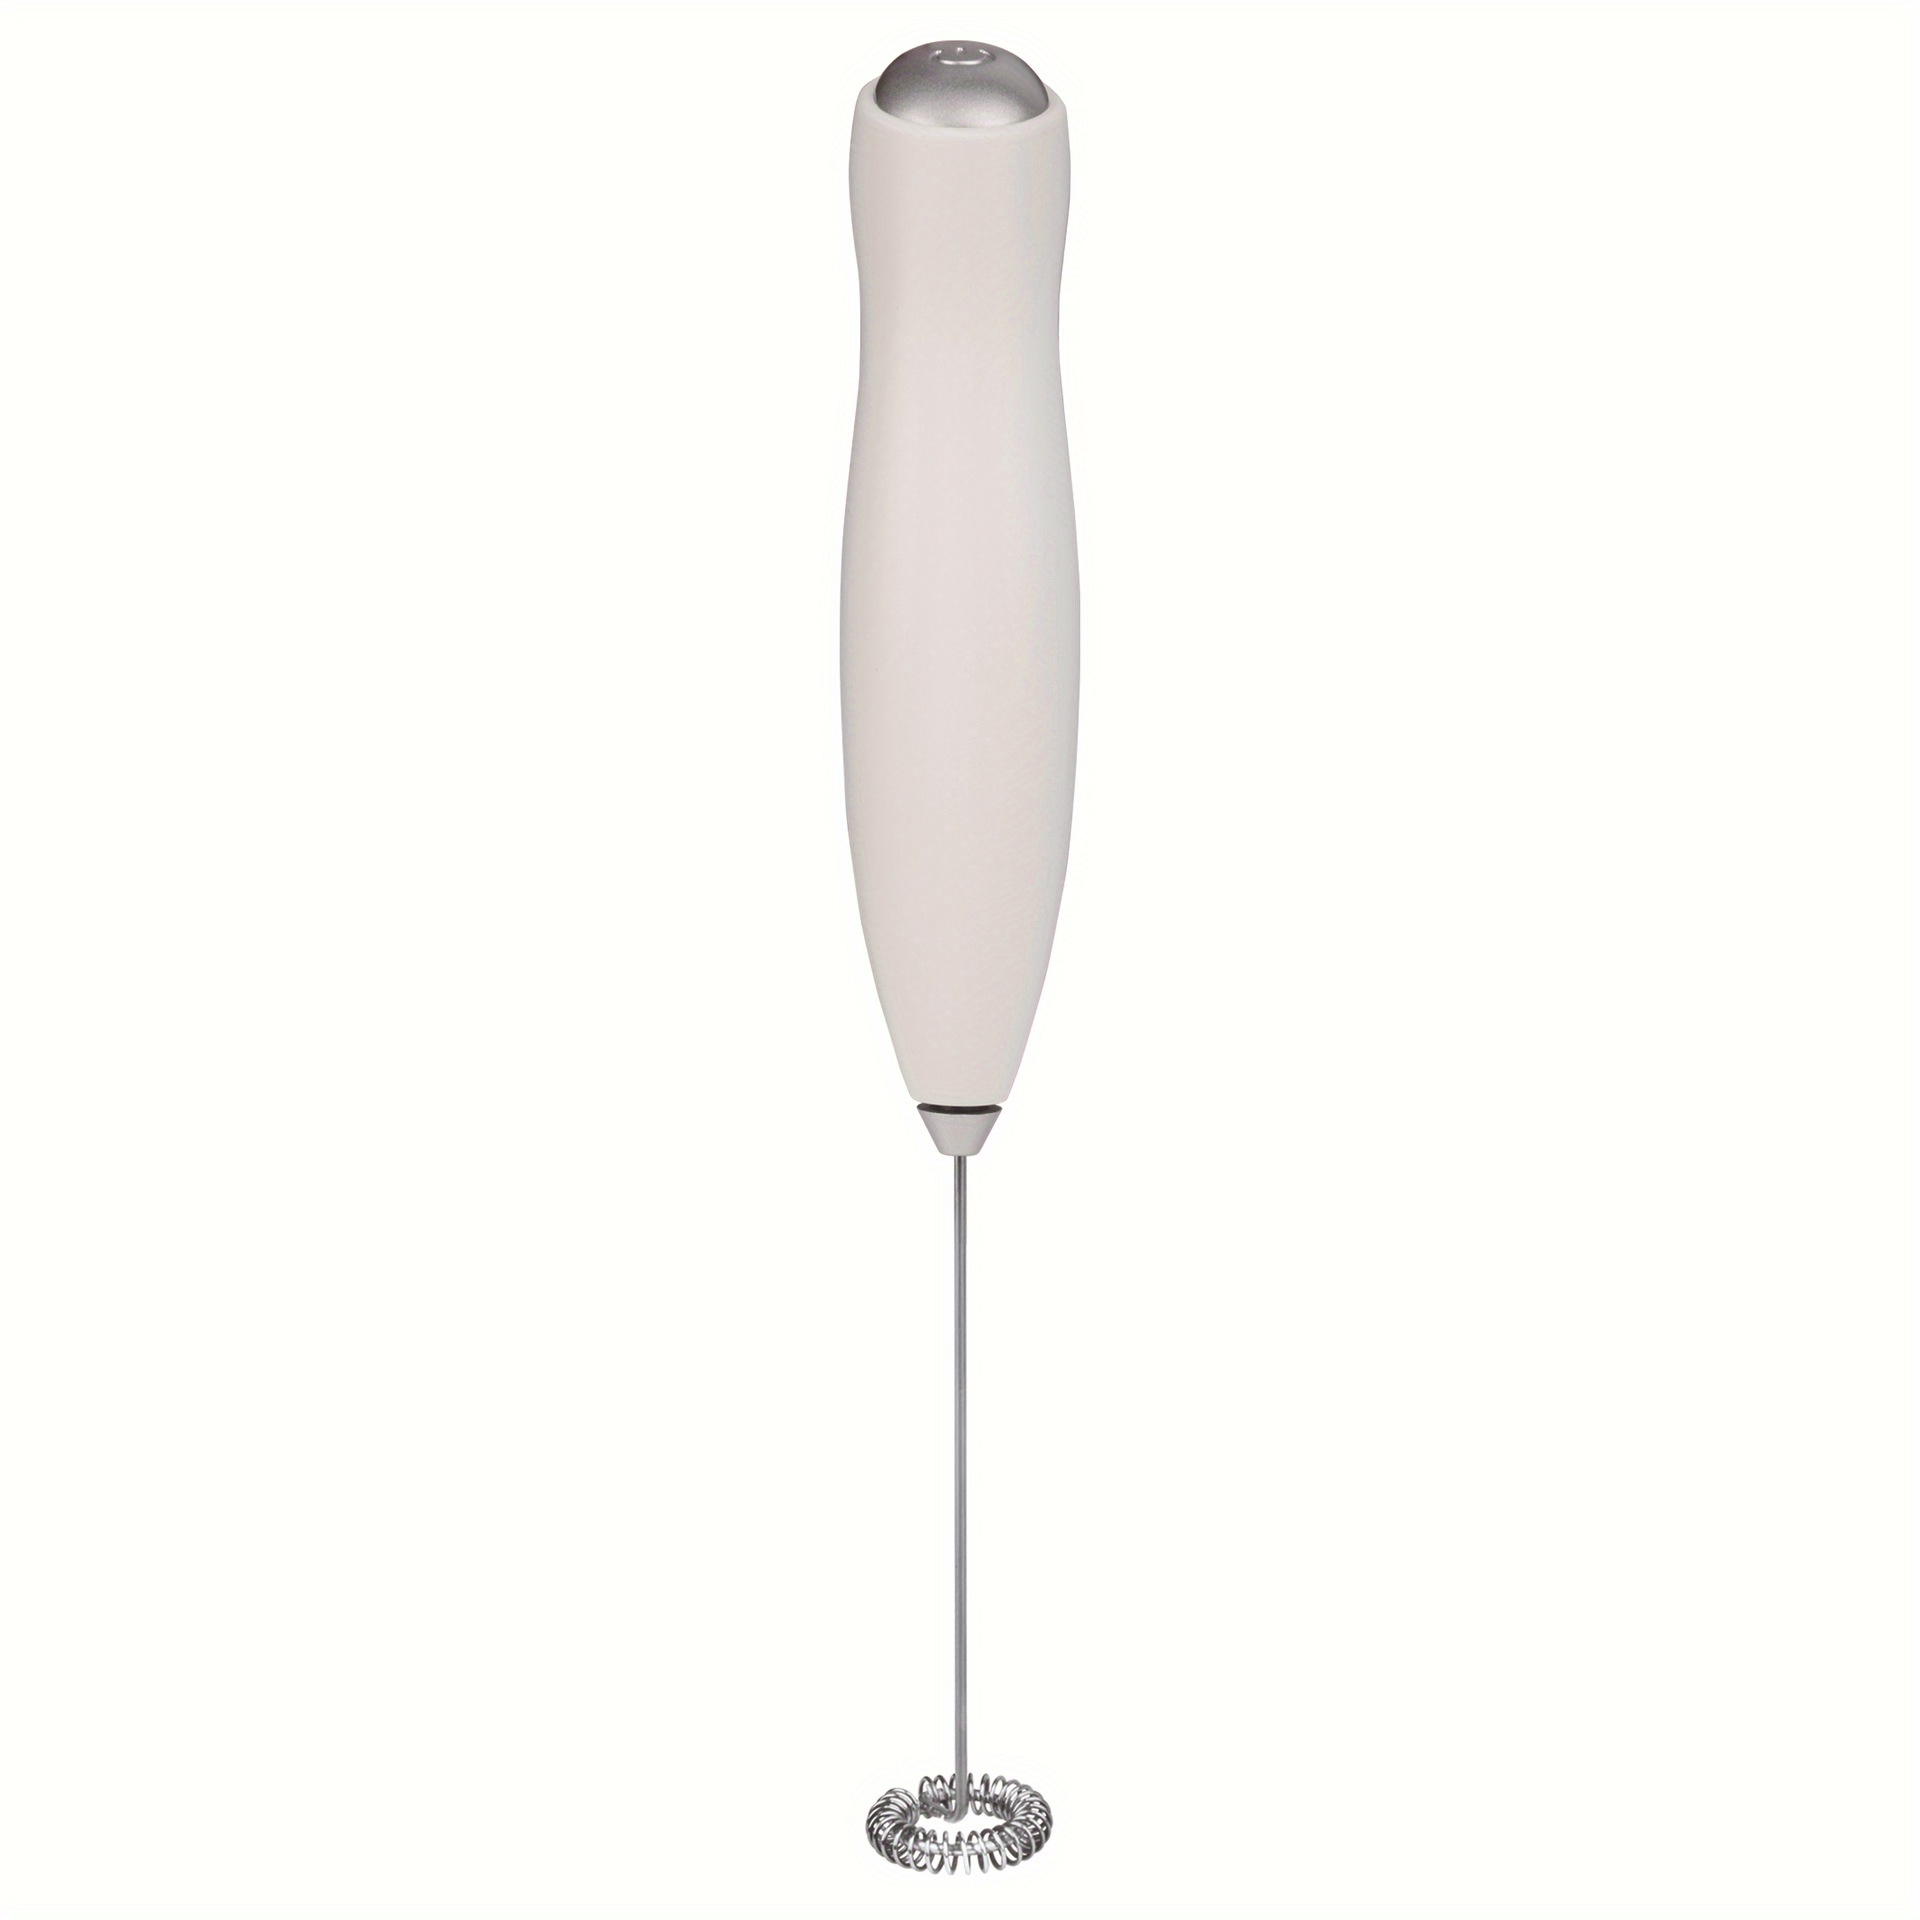 Handheld Milk Frother - White